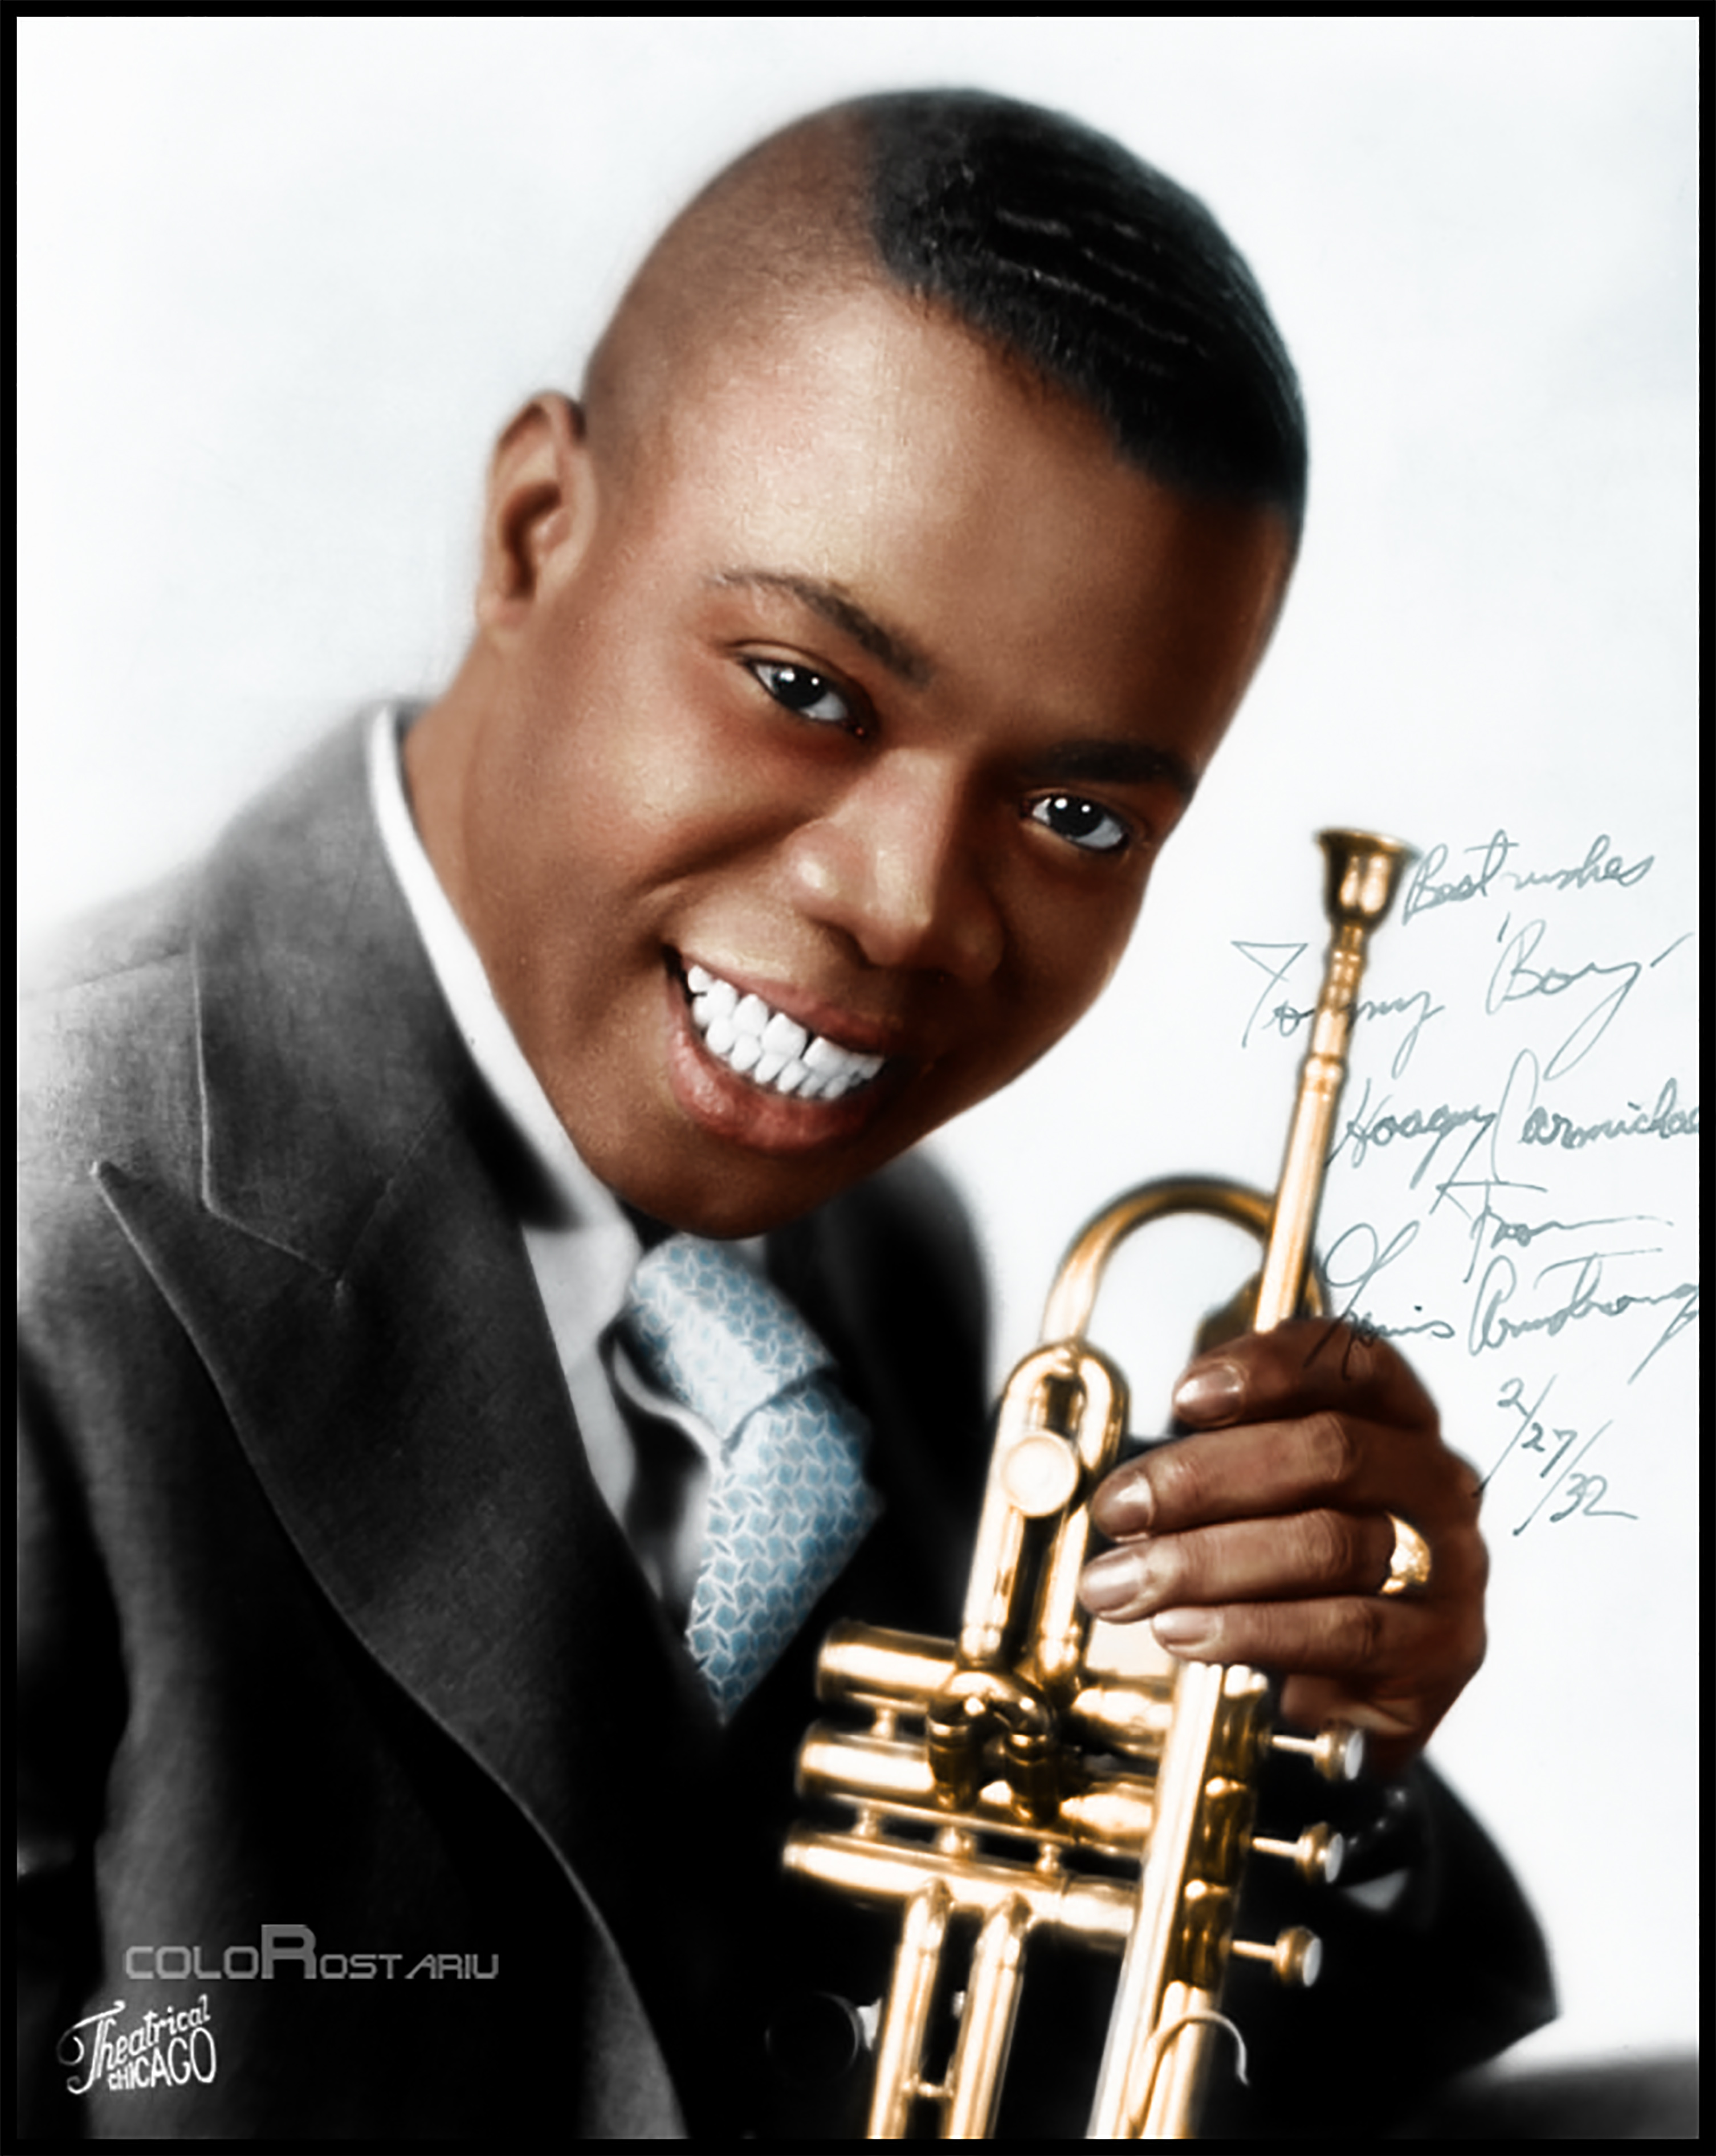 Louis Armstrong - Wikipedia